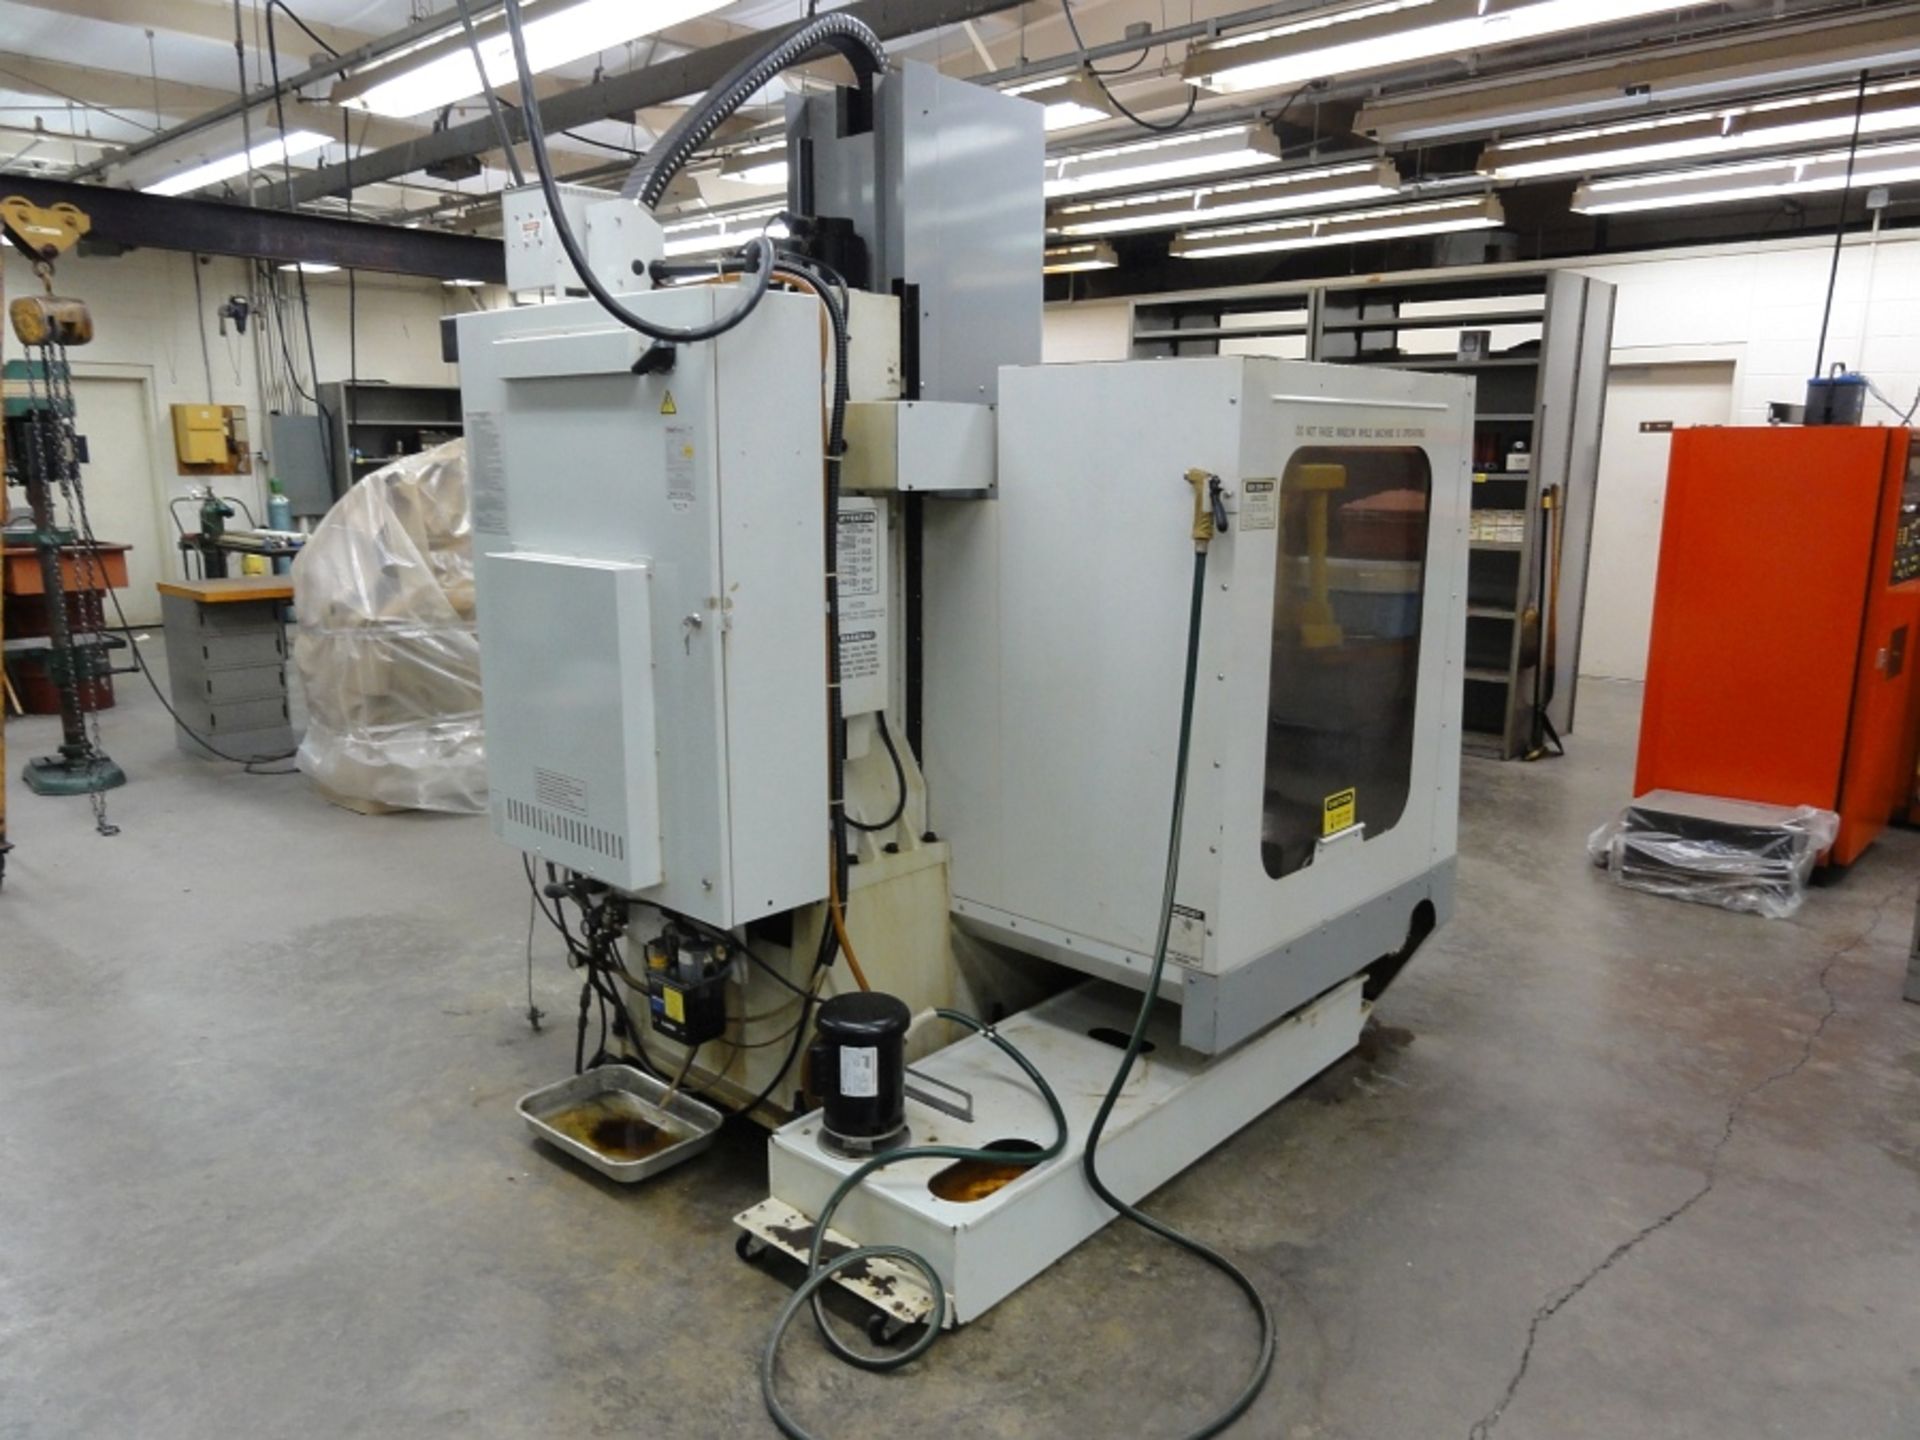 Haas VF2 CNC Milling Machine, 4th Axis Ready 2 HP, SN 18461, 1999, 2723 cut time hrs. - Image 6 of 8